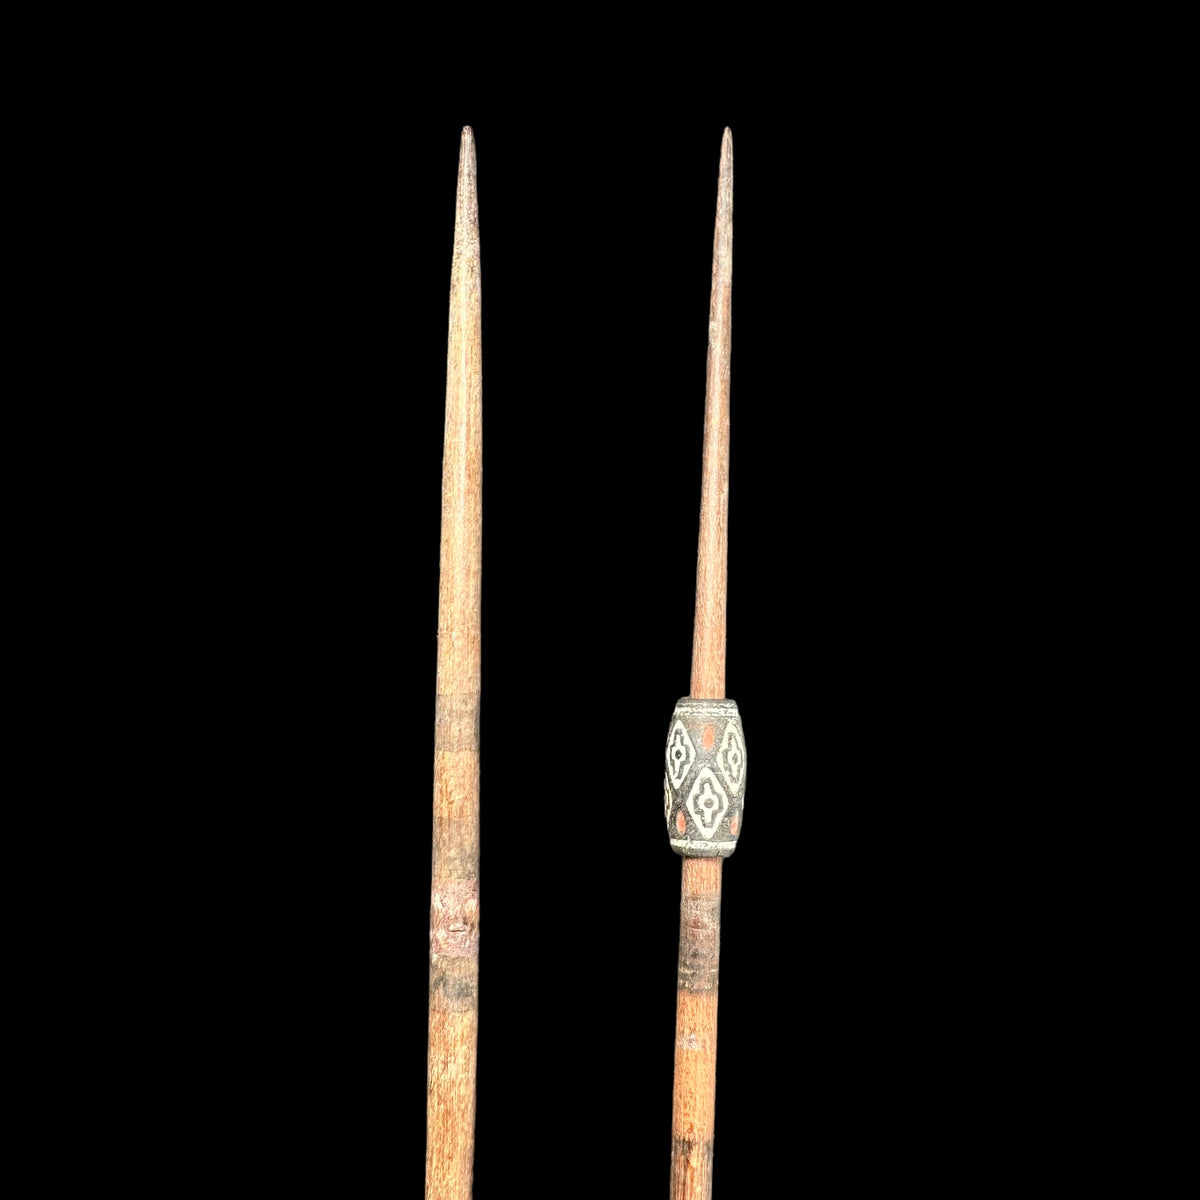 2 Pre-Columbian Chancay Spindles